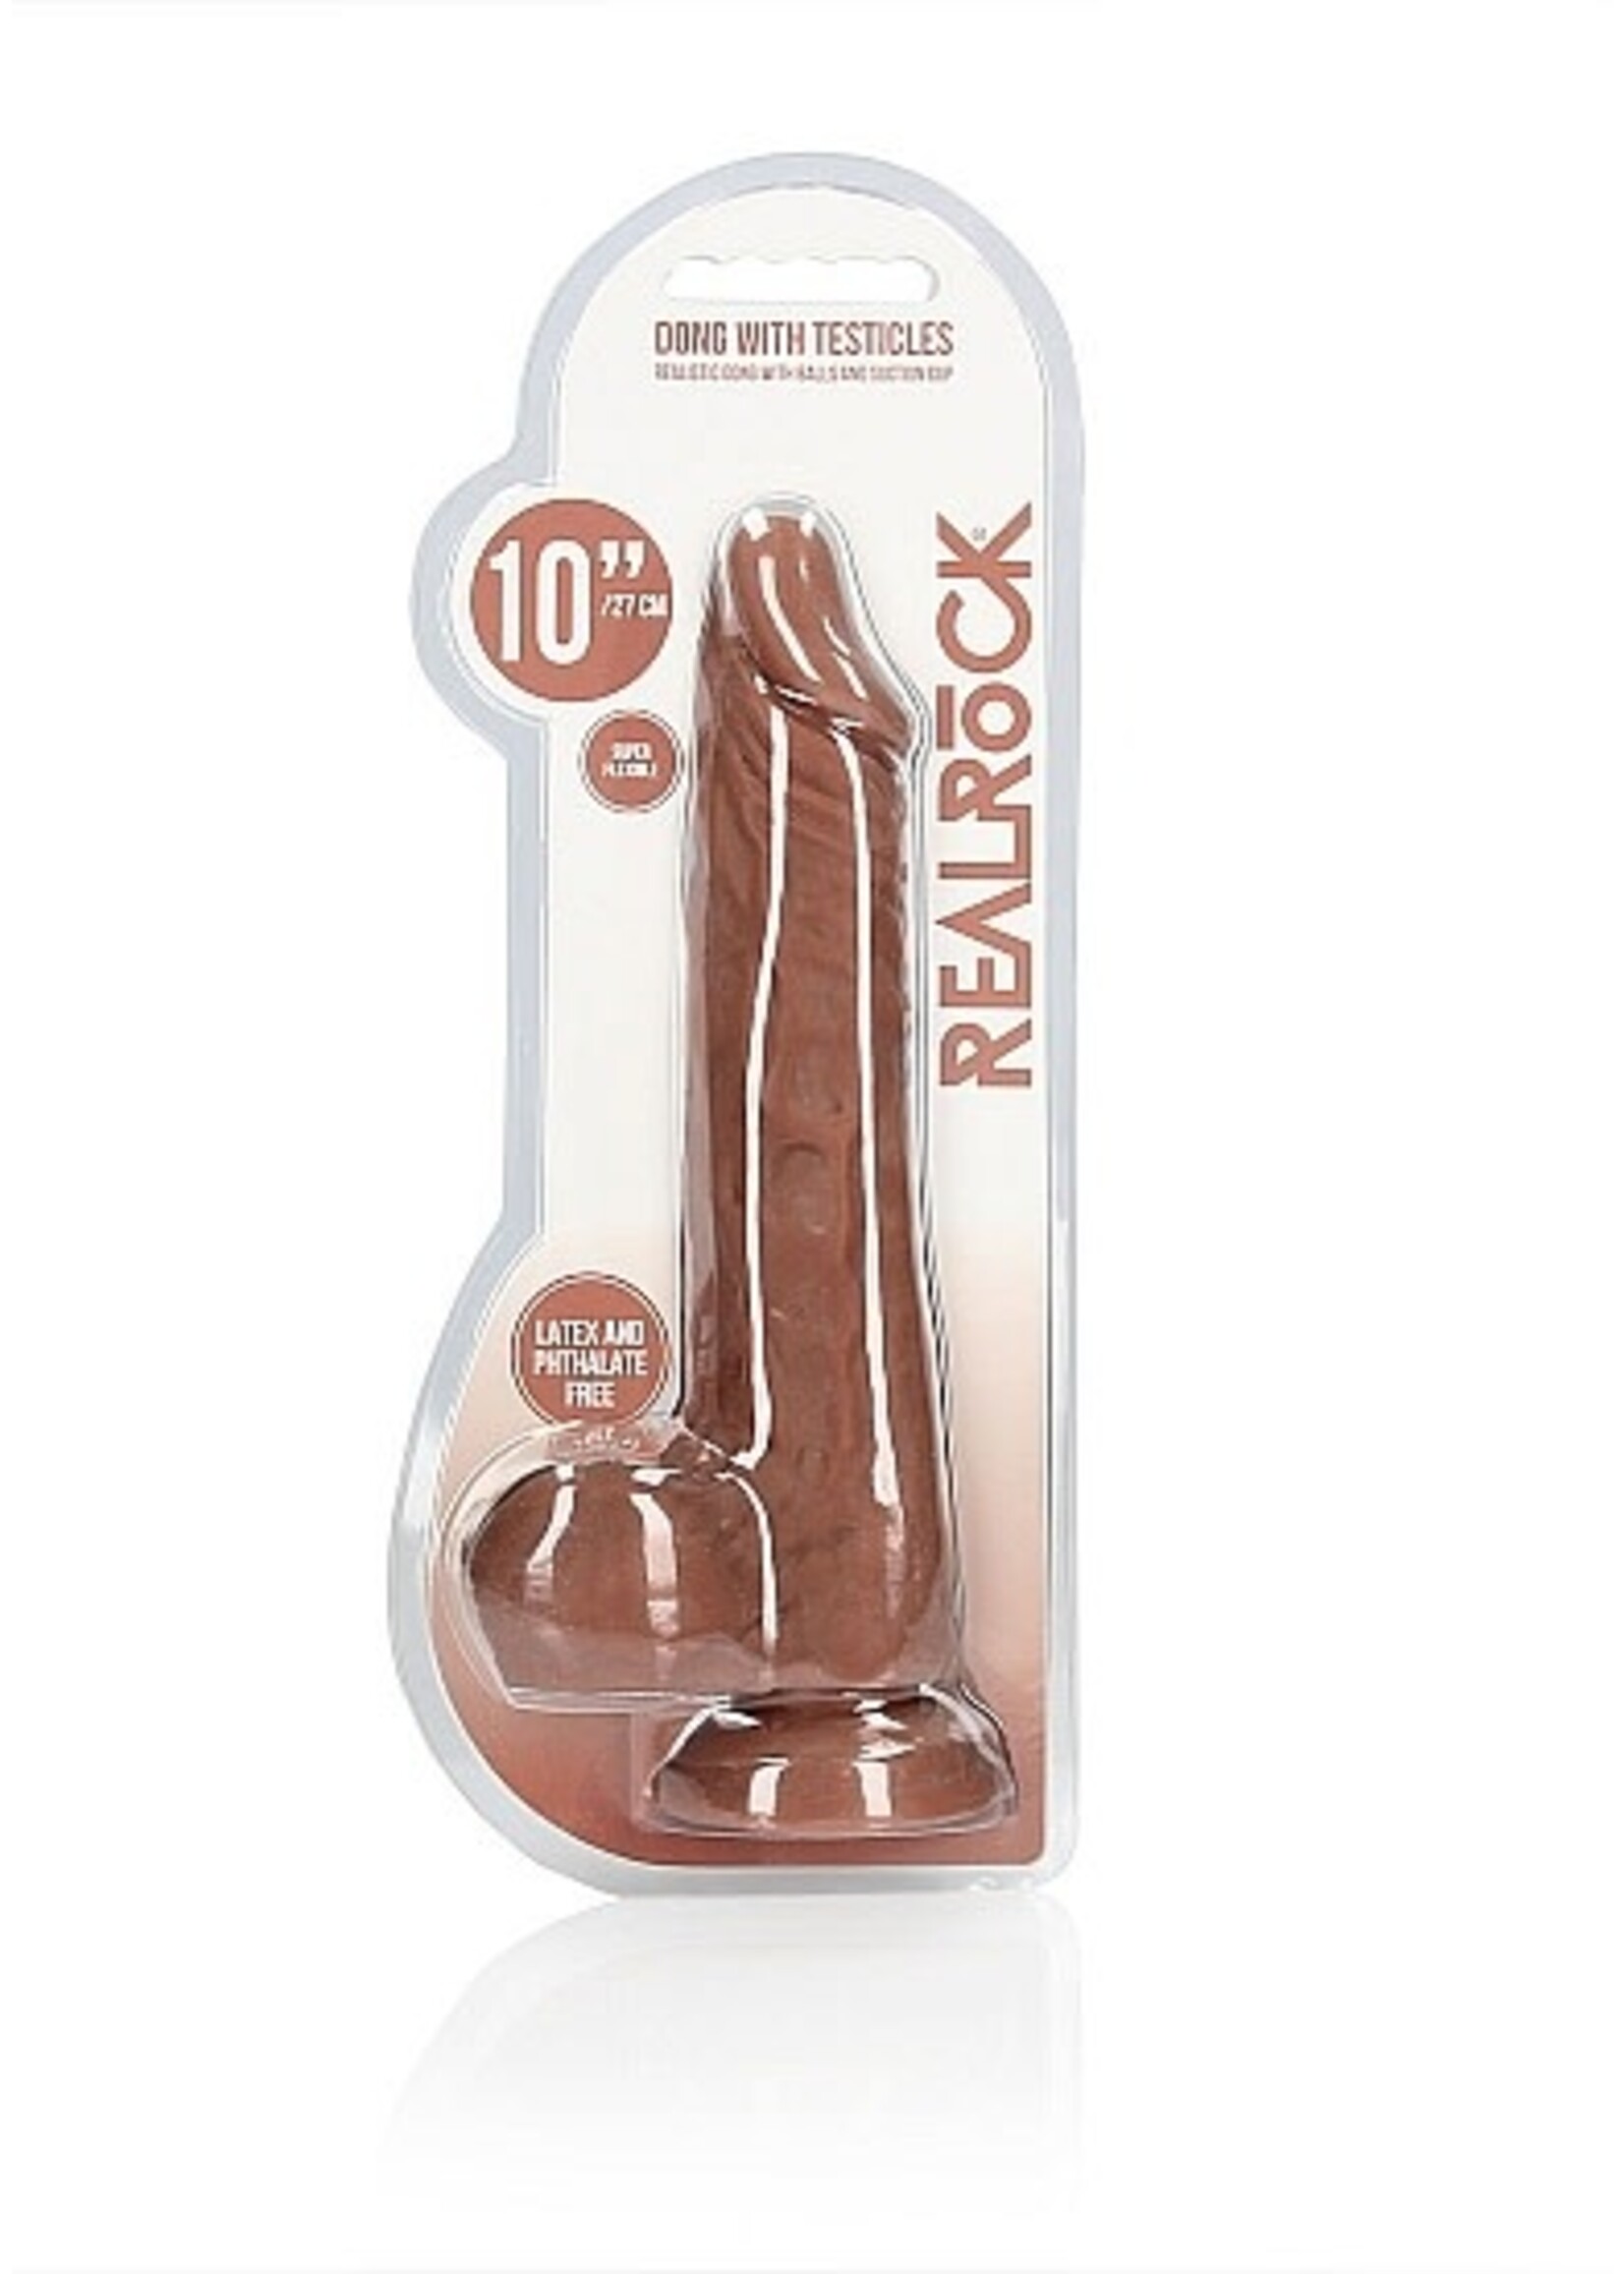 Realrock by Shots Dong met testikels - 25 CM